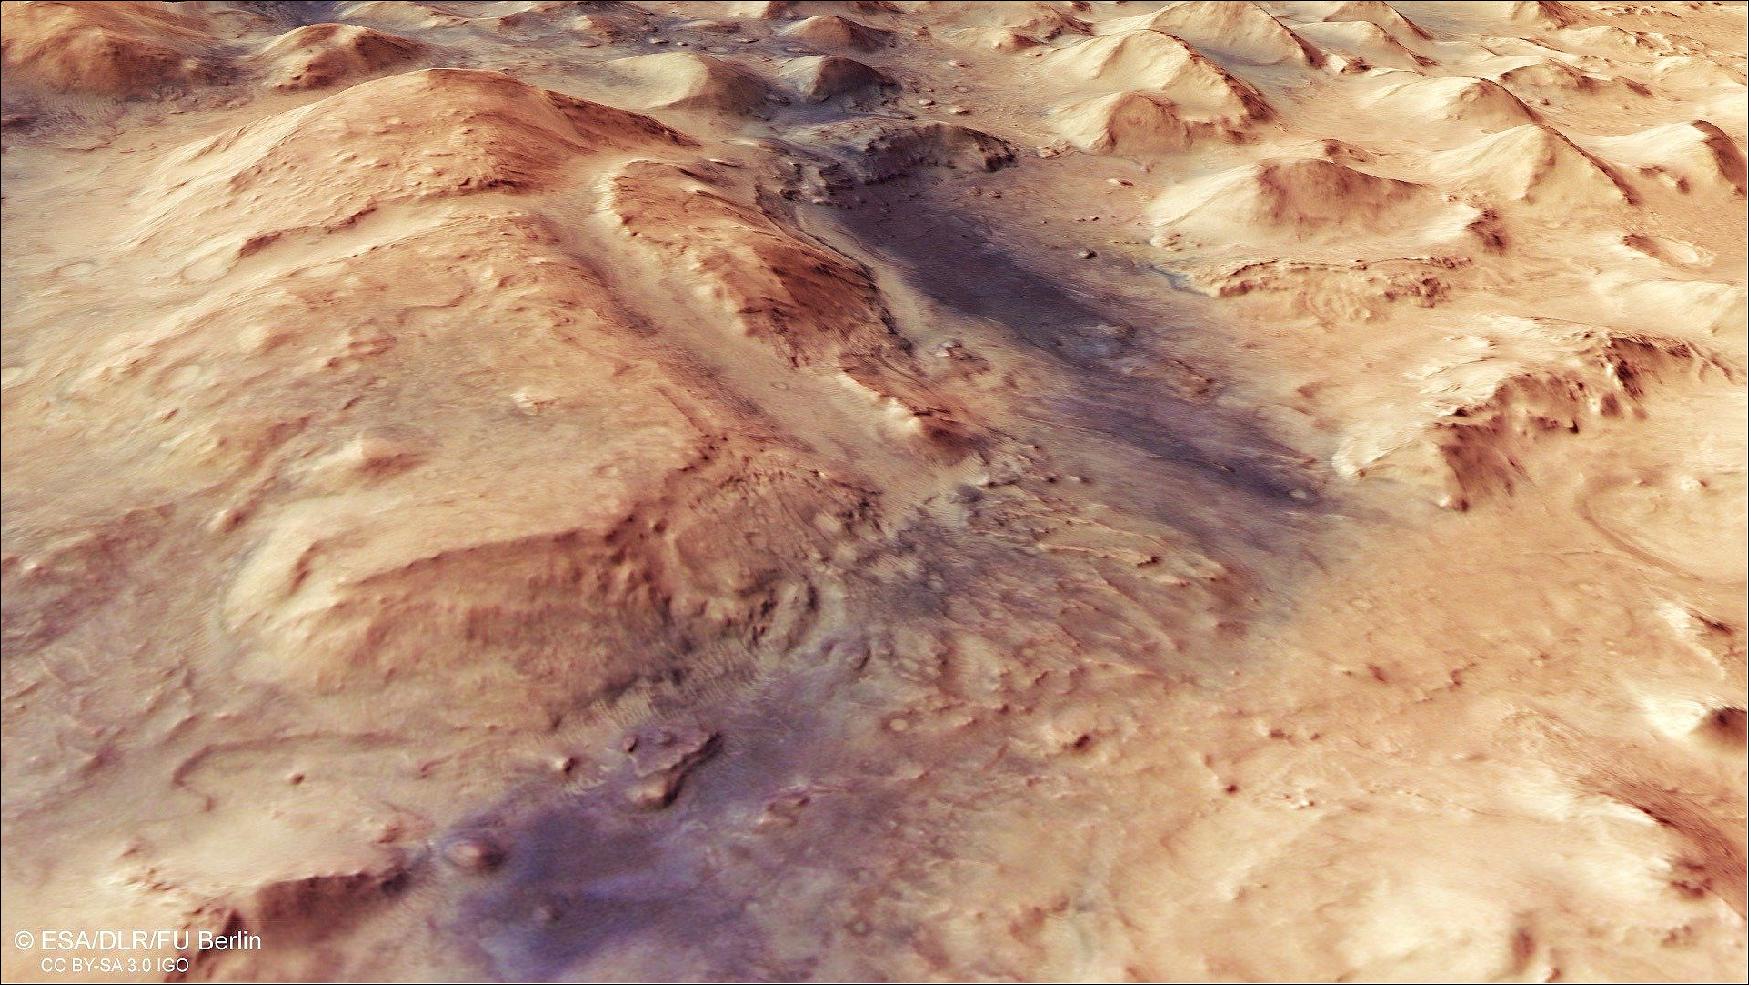 Figure 64: This perspective view shows Nili Fossae, an escarpment sitting between the northern lowlands (lower right) and southern highlands (upper left) of Mars (image credit: ESA/DLR/FU Berlin, CC BY-SA 3.0 IGO)